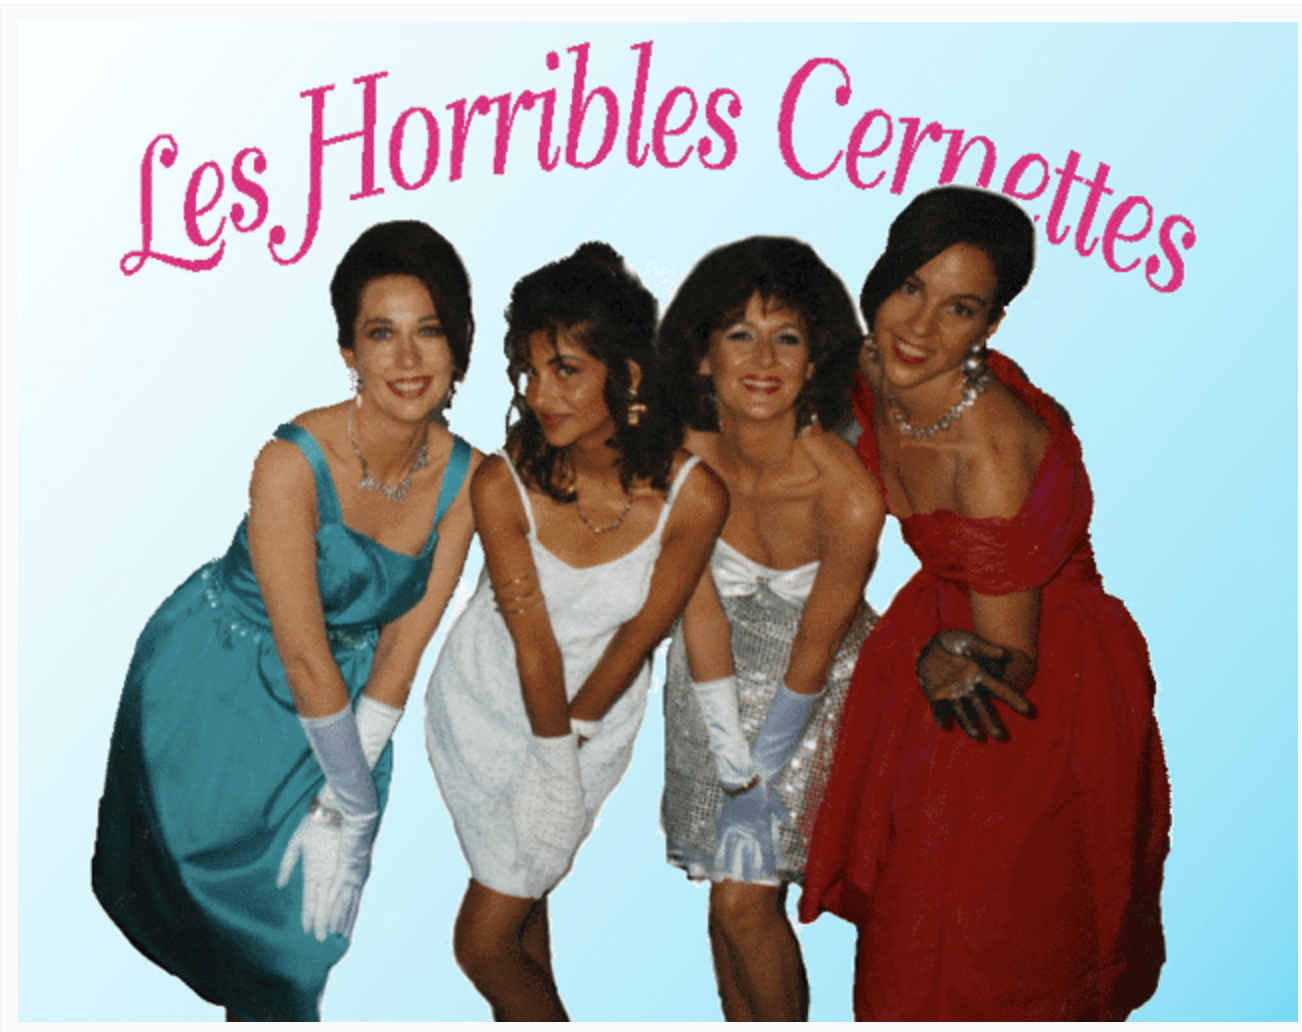 Image shows the four members of pop parody Les Horribles Cernettes. The image was the first posted on the worldwide web. The four women wear dresses and pose for the camera.